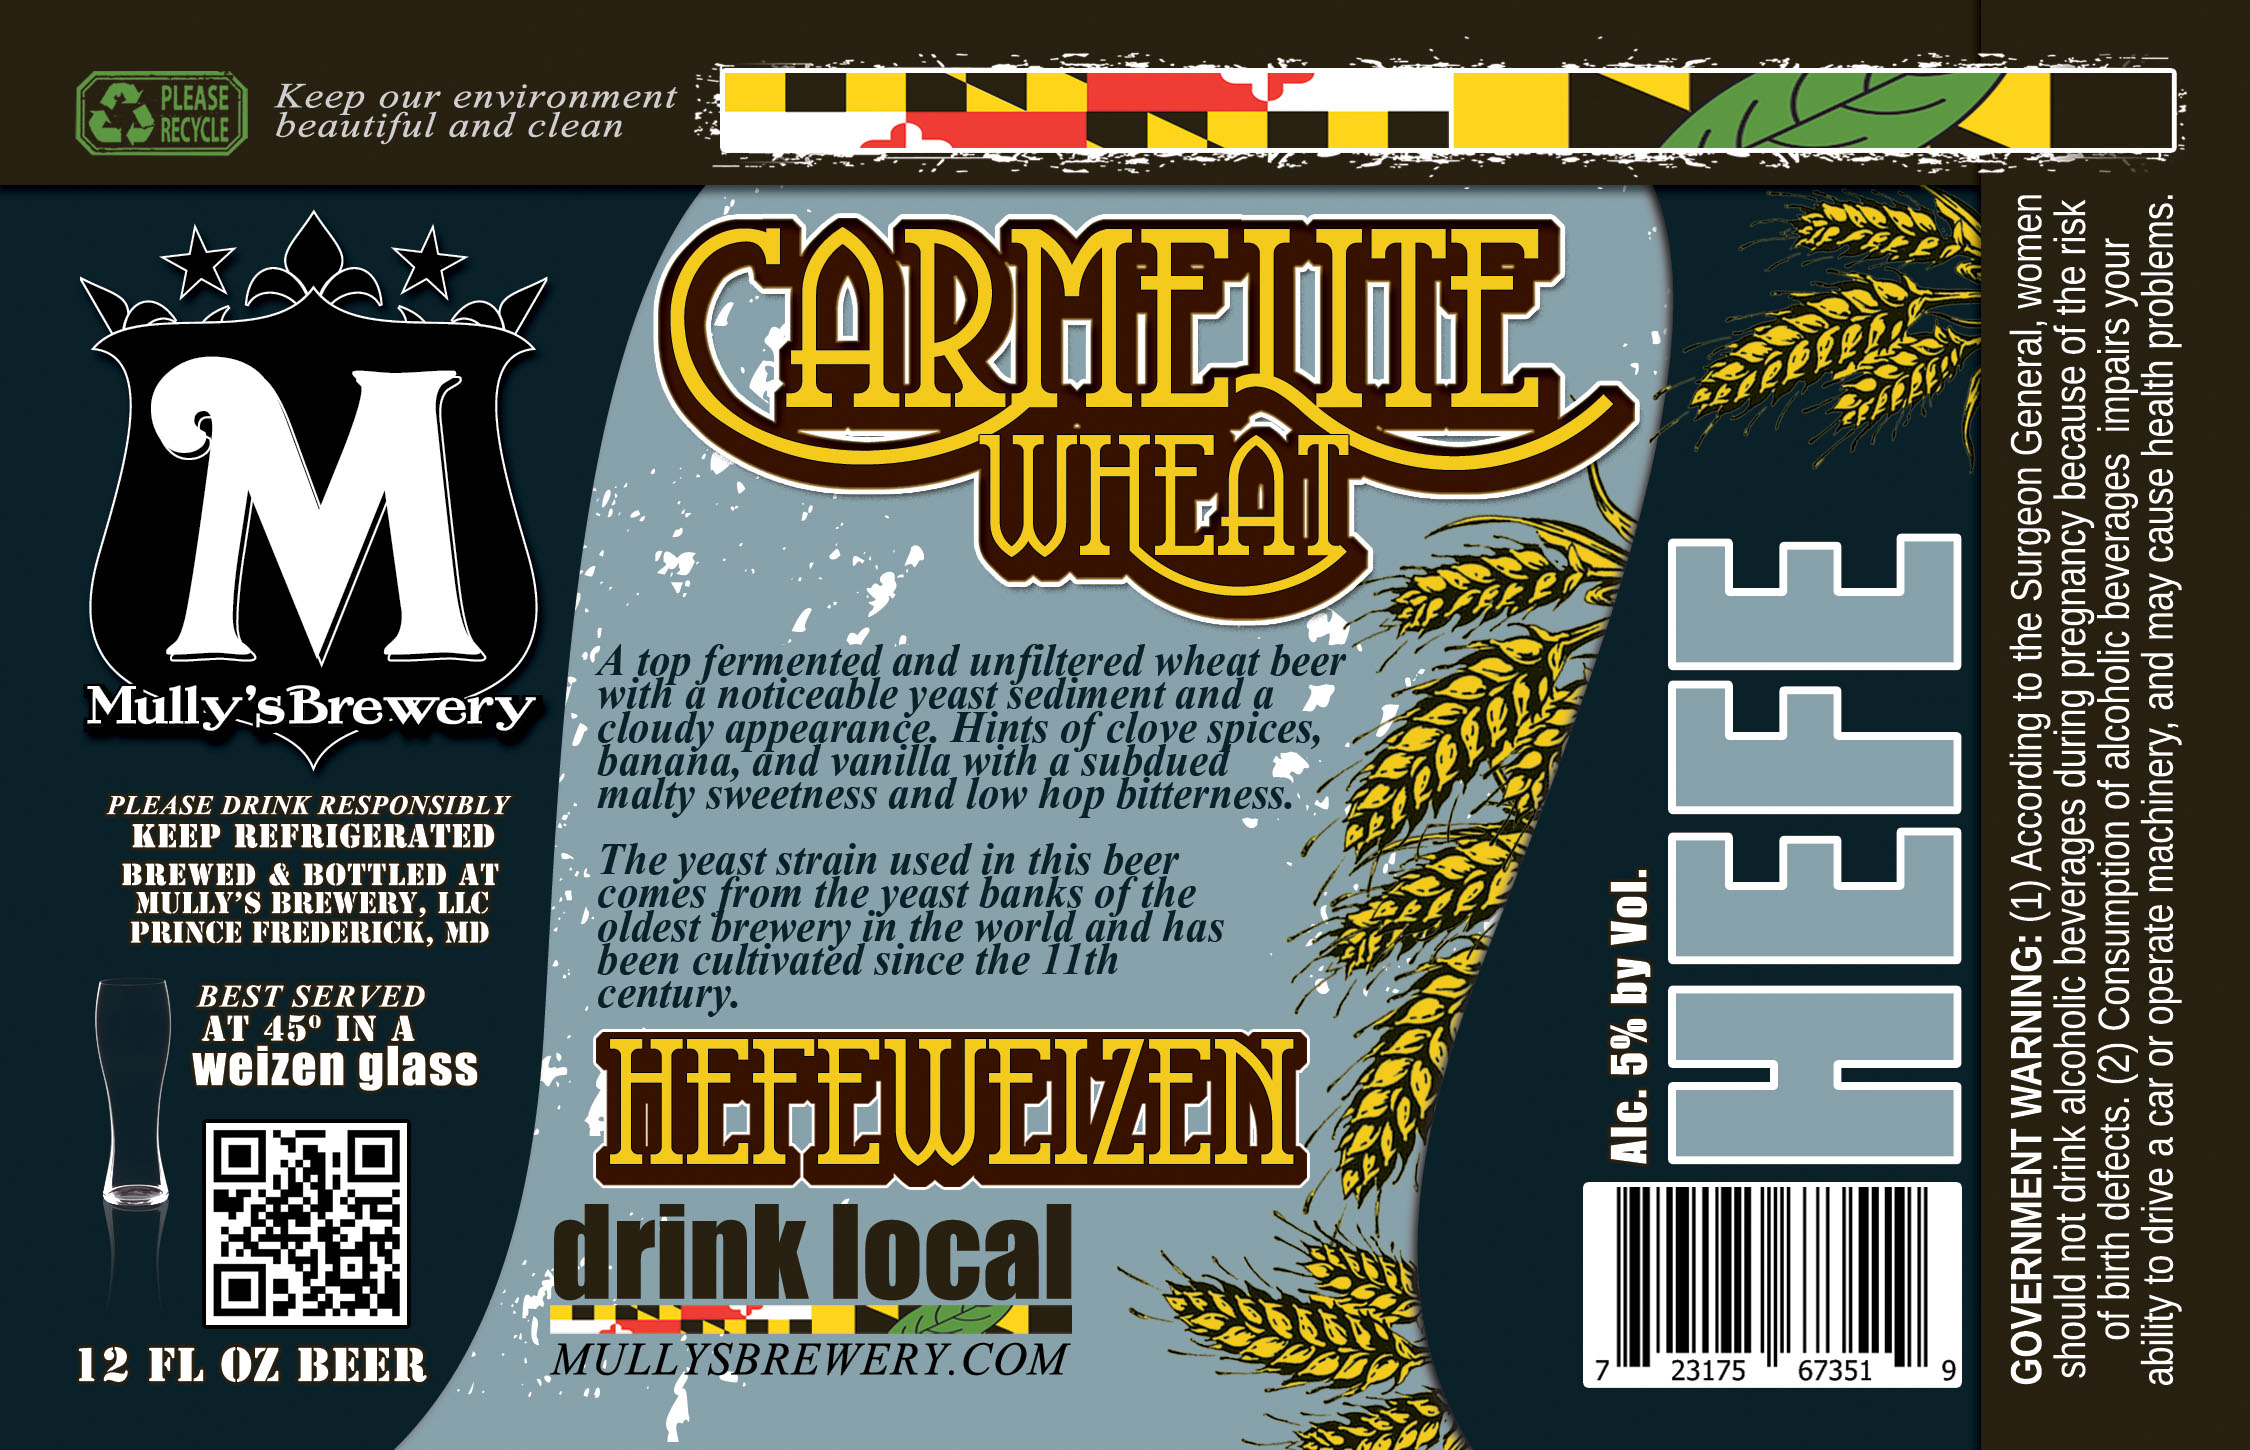 Mully's Brewery Carmelite Wheat